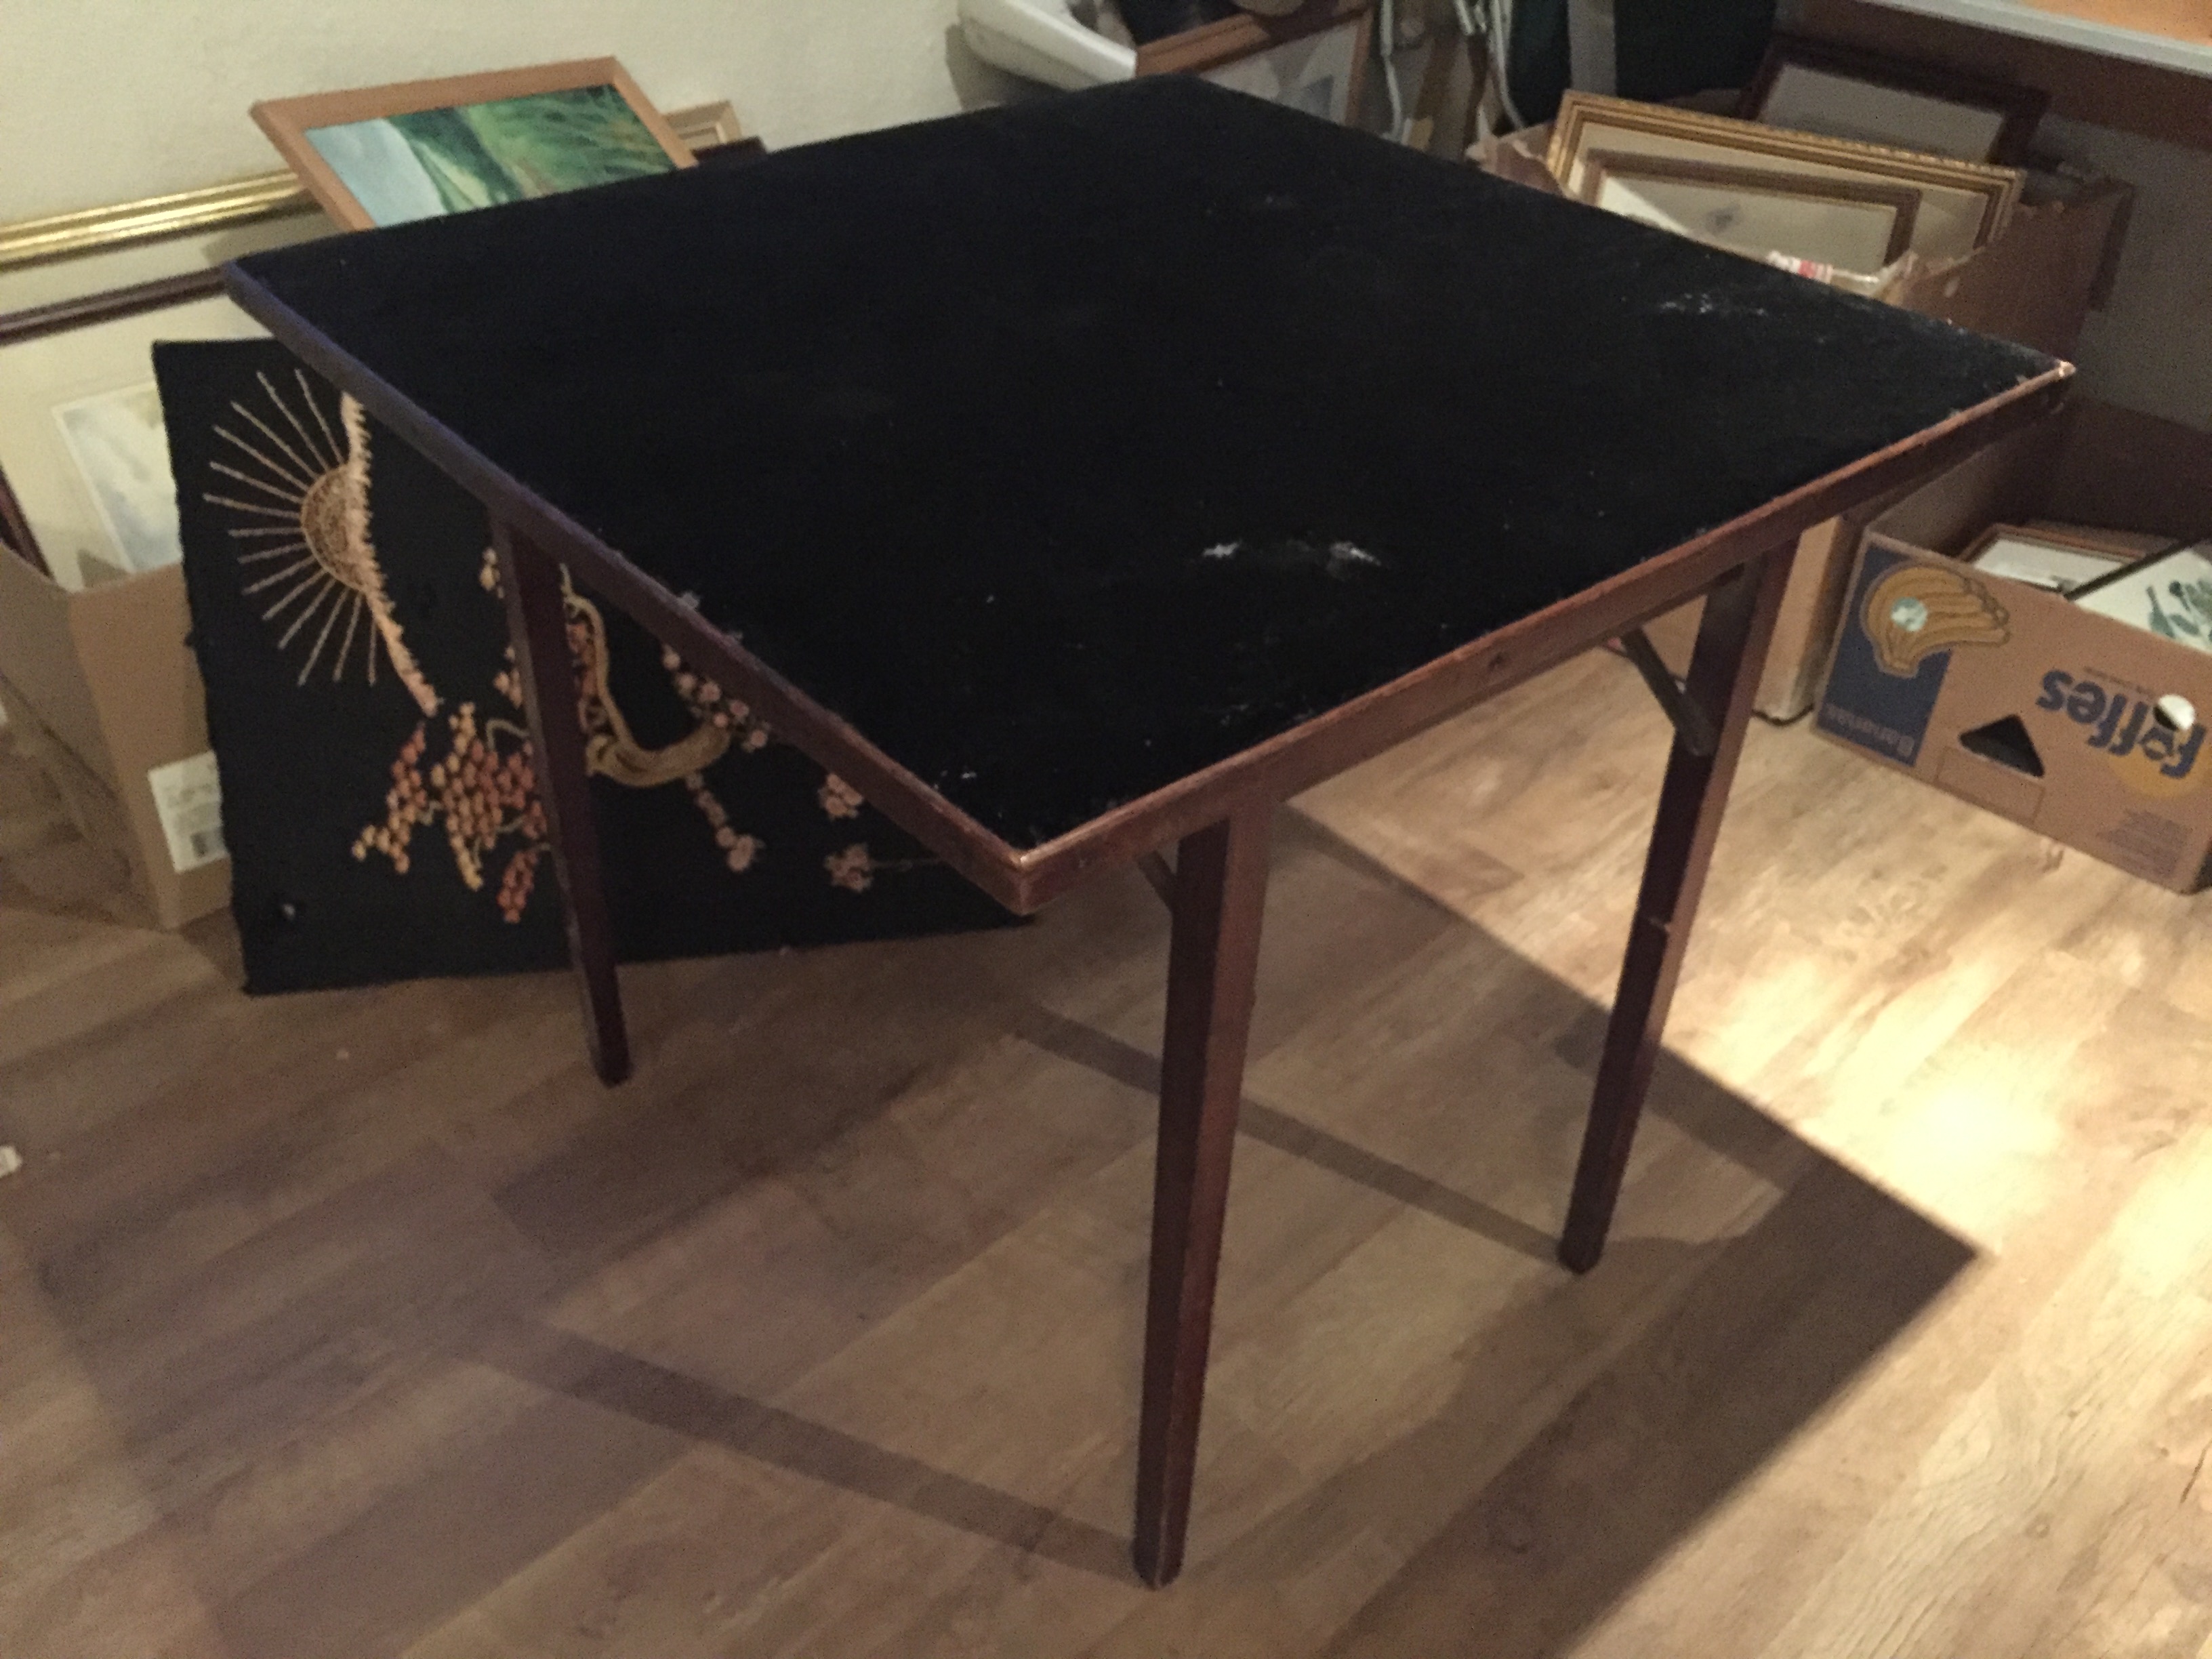 A folding card table with beige top.